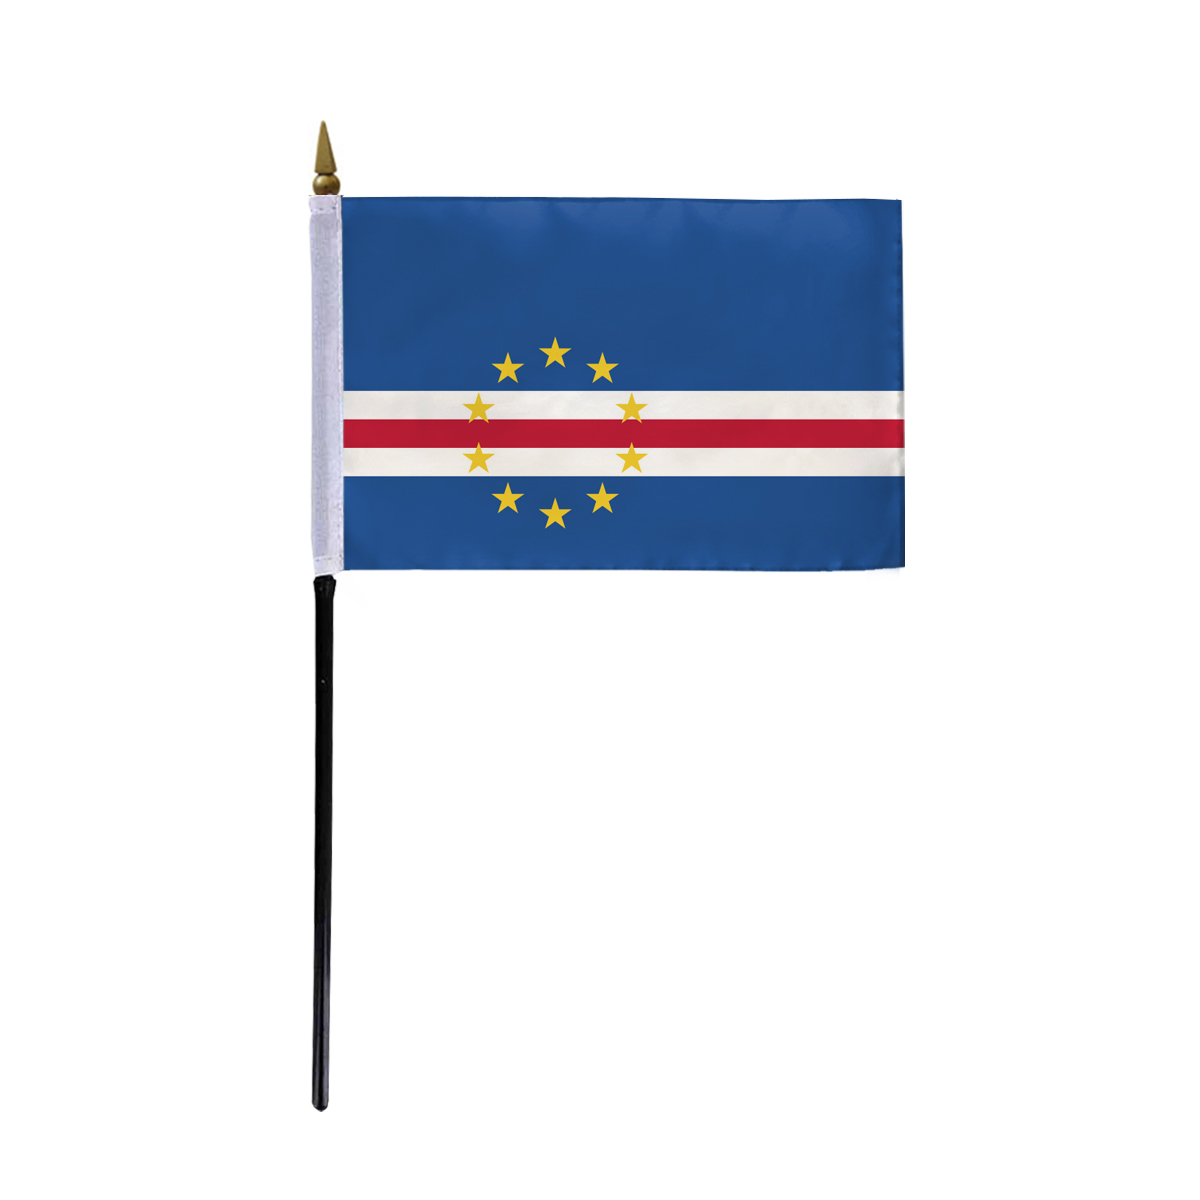 AGAS Small Cape Verde National Flag 4x6 inch - 11 inch